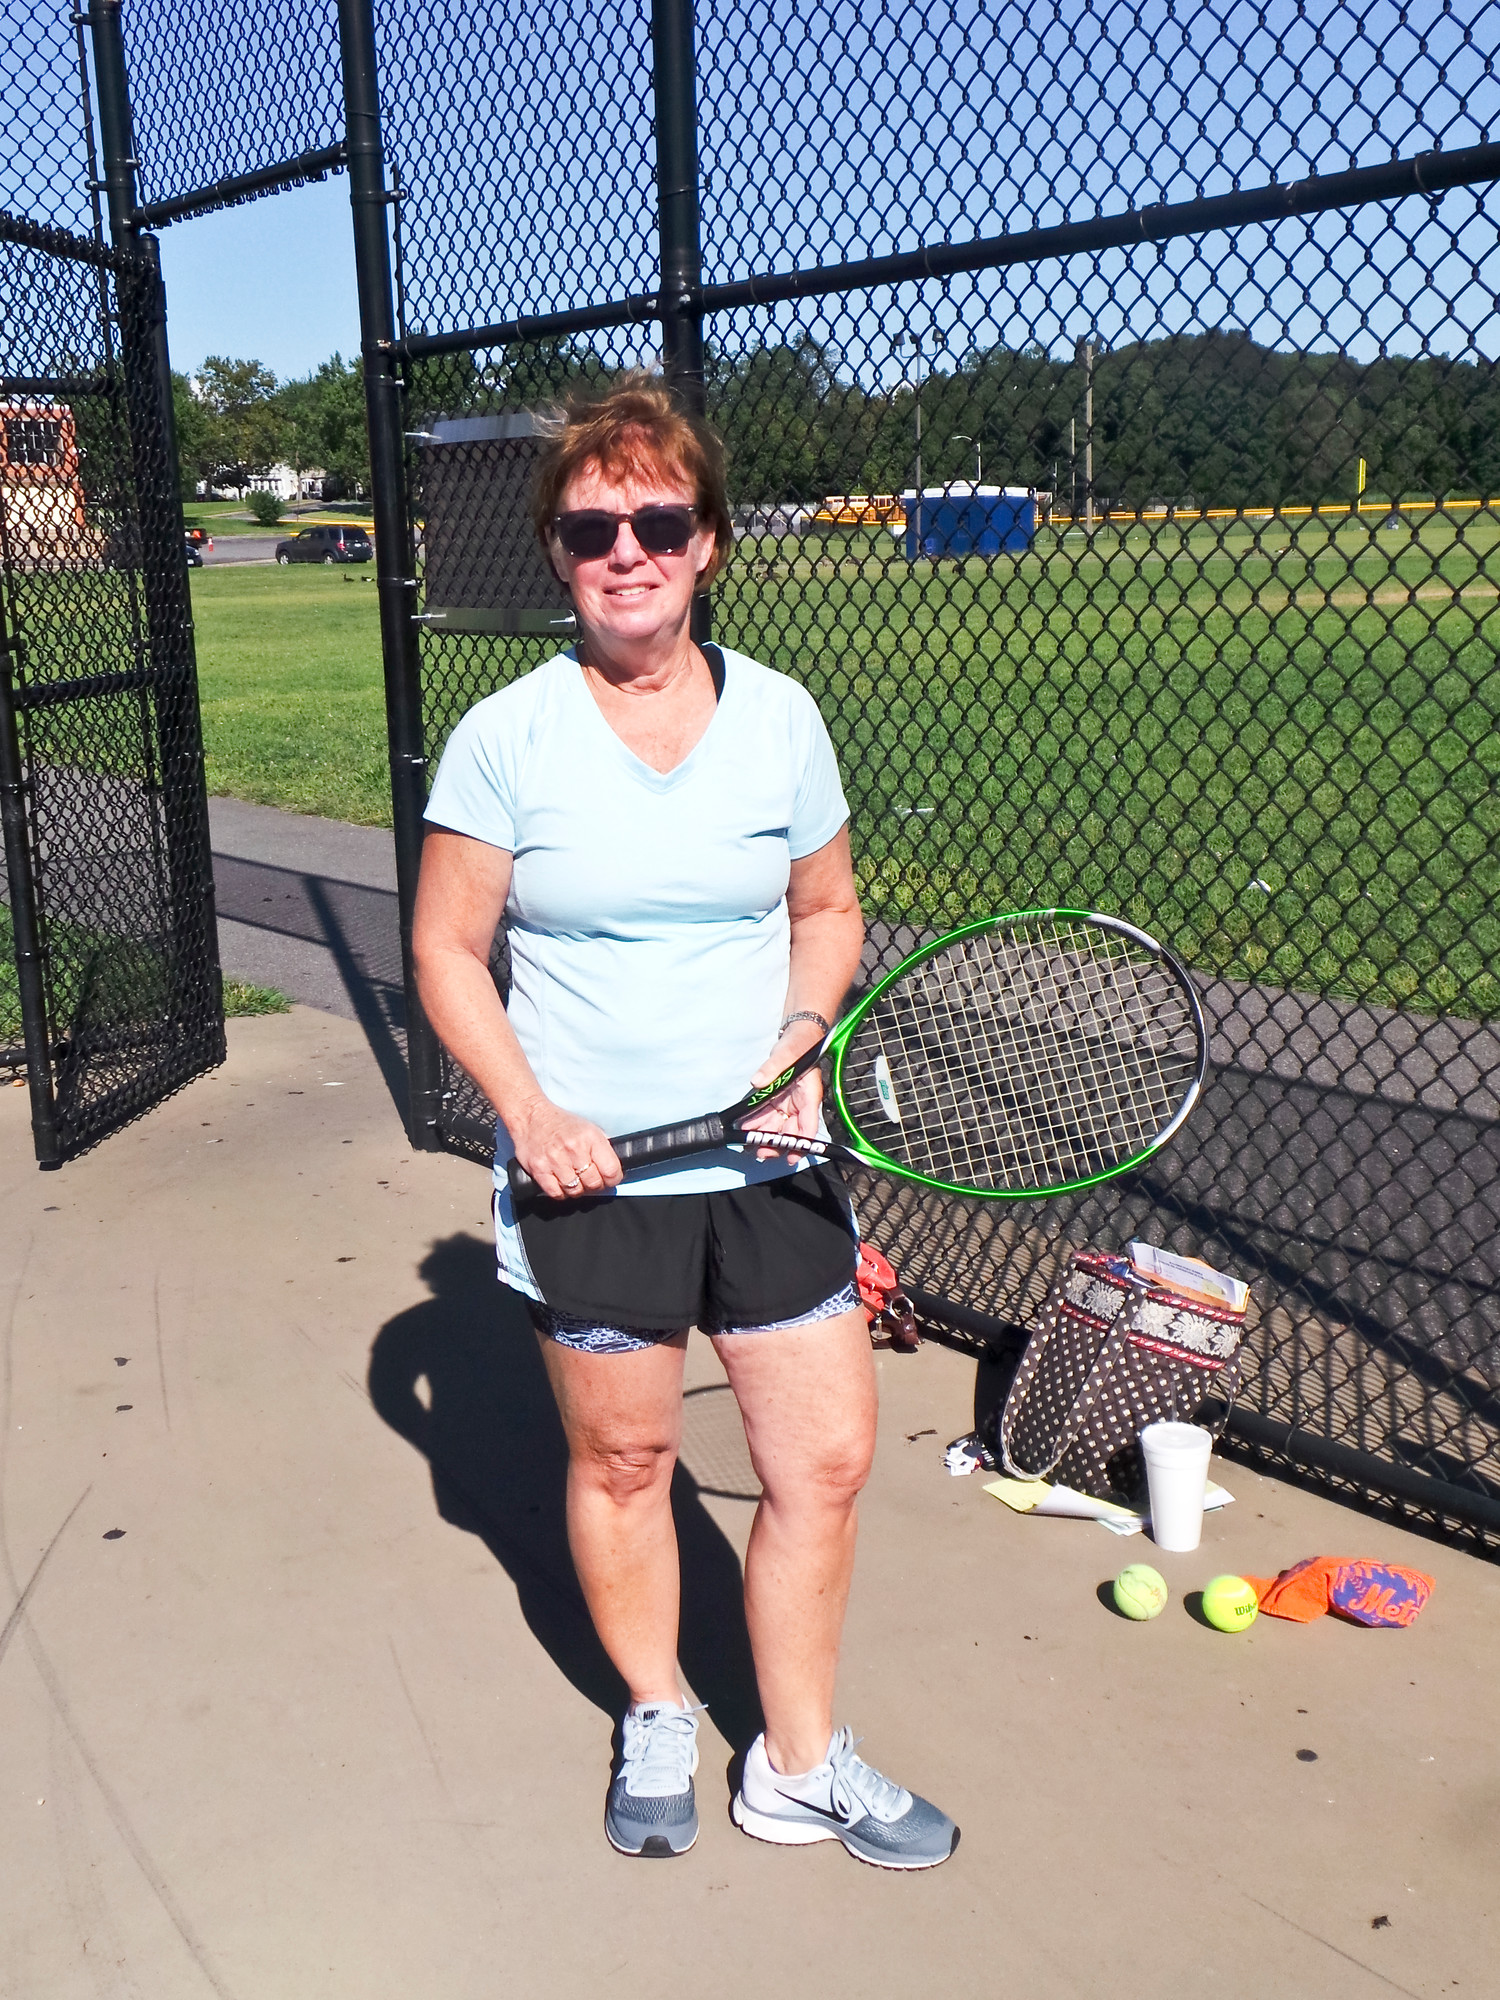 patti Ward, a nurse in the Malverne school district for 25 years, has been coaching the high school tennis team for the past four years.